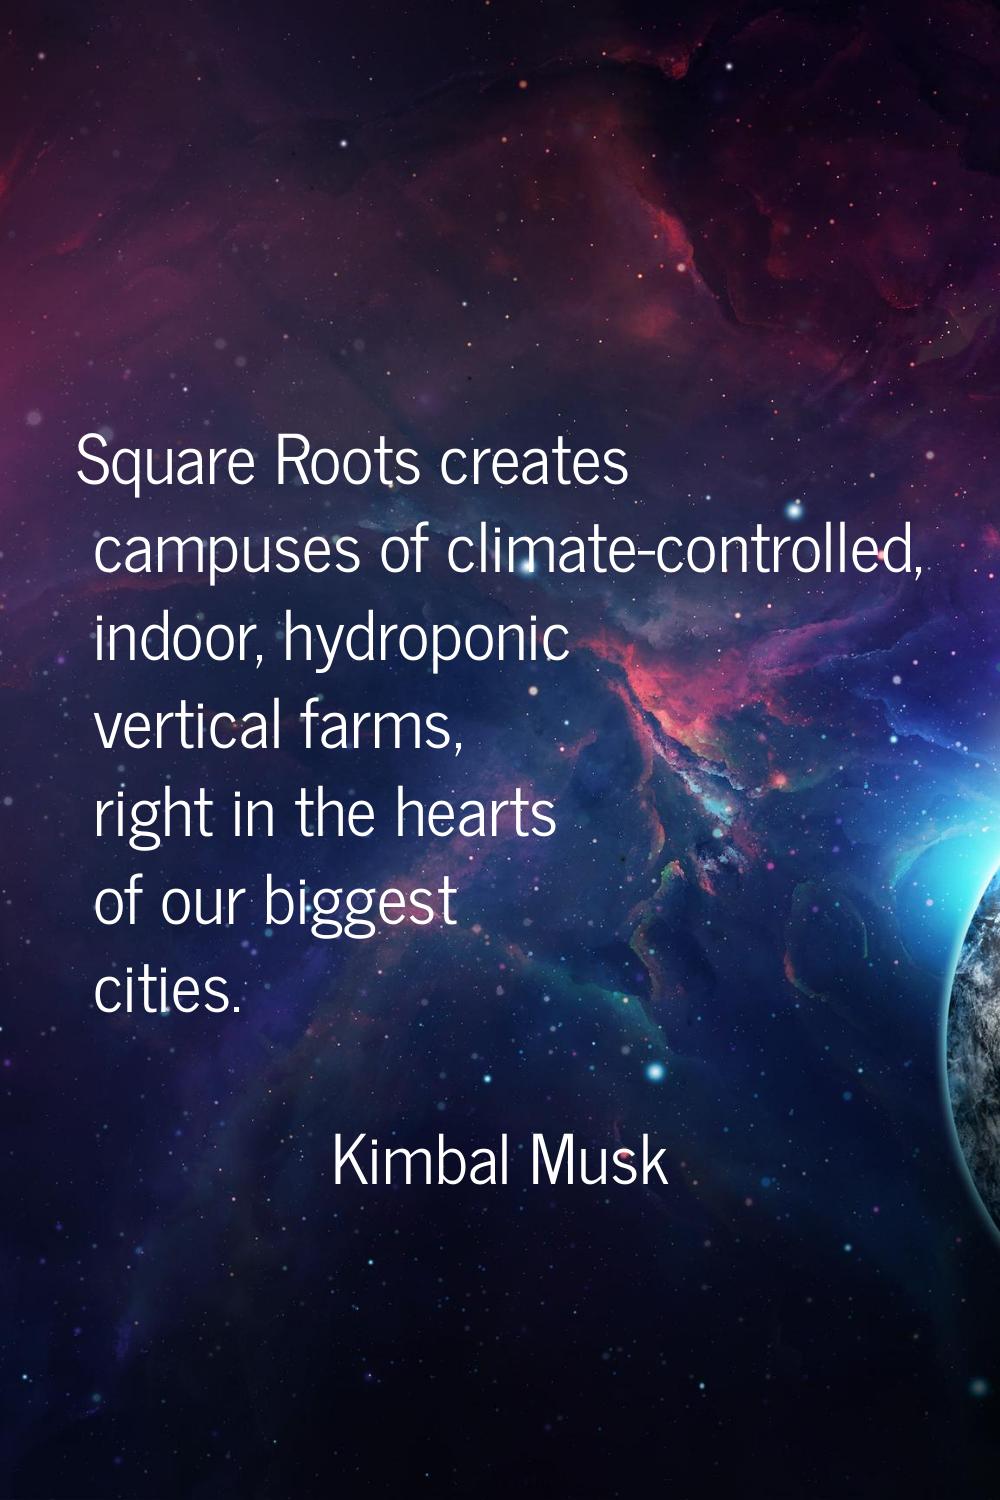 Square Roots creates campuses of climate-controlled, indoor, hydroponic vertical farms, right in th